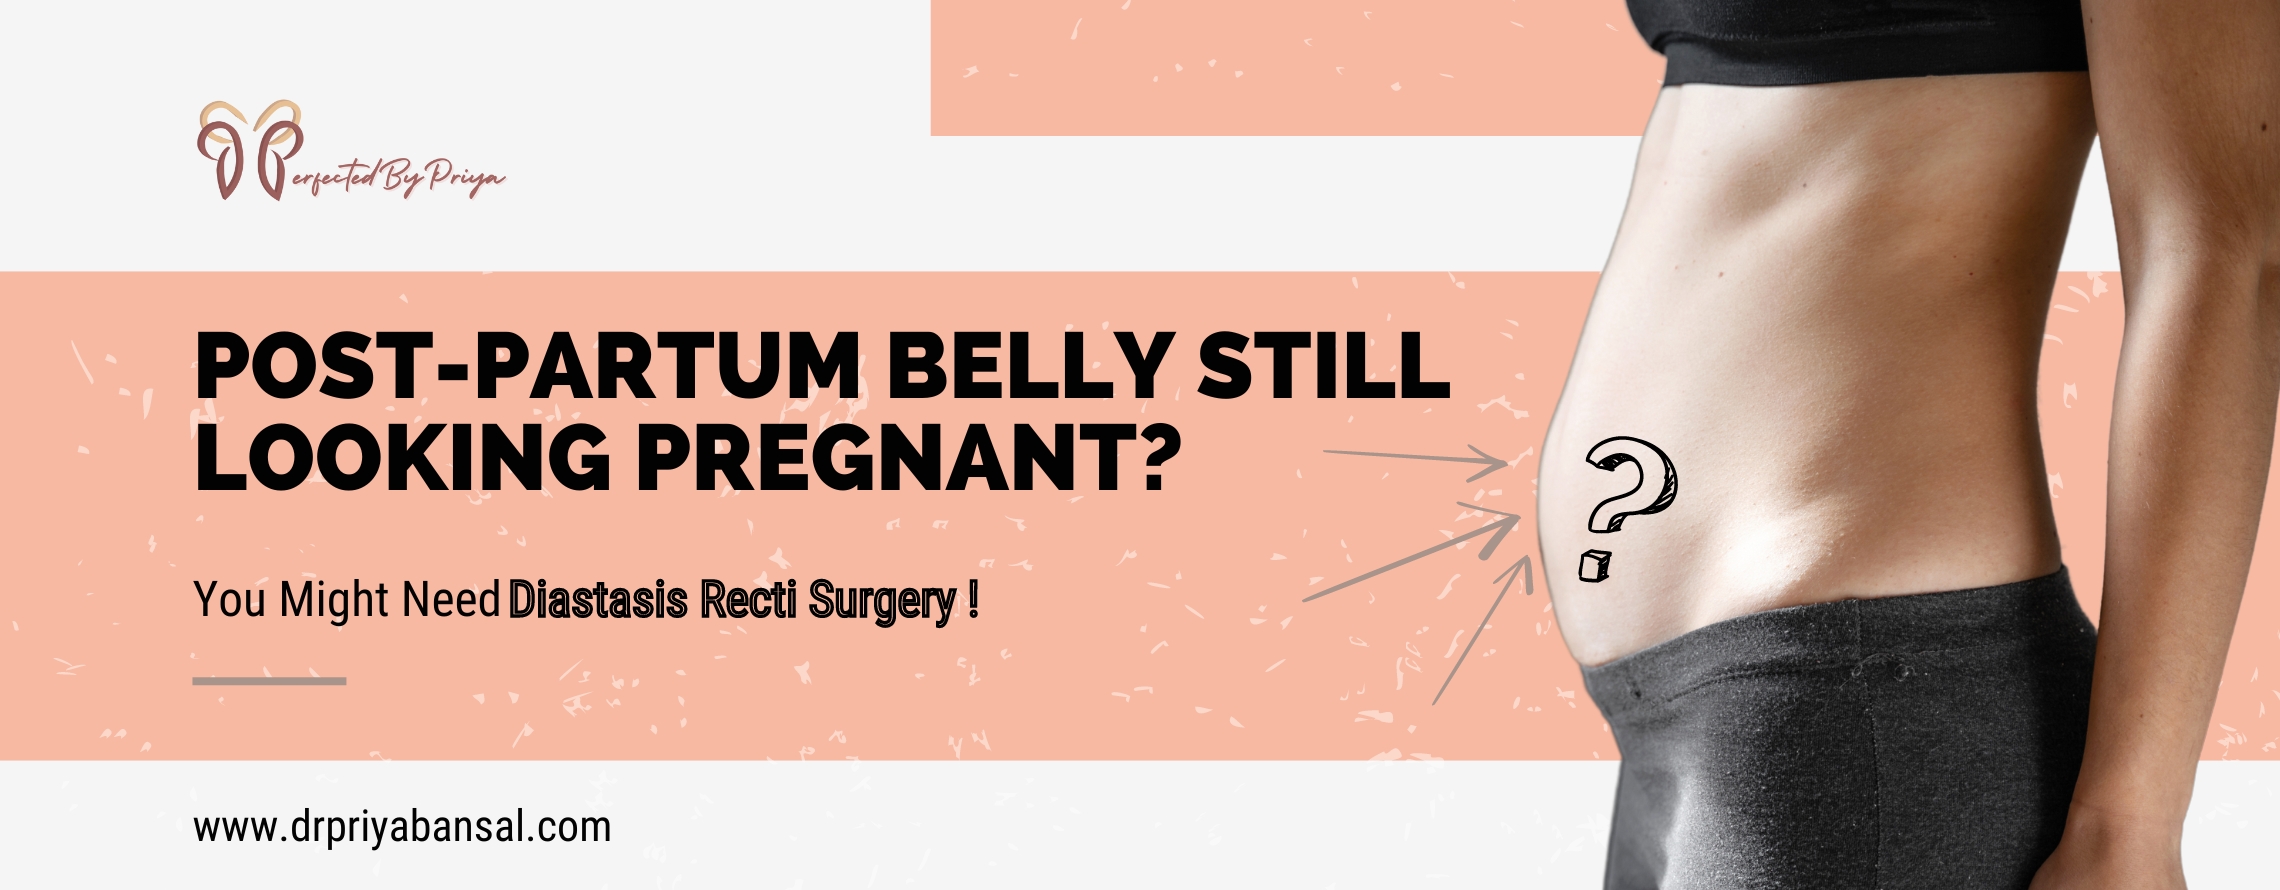 Is Your Post-Partum Belly Still Looking Pregnant - Dr Priya Bansal